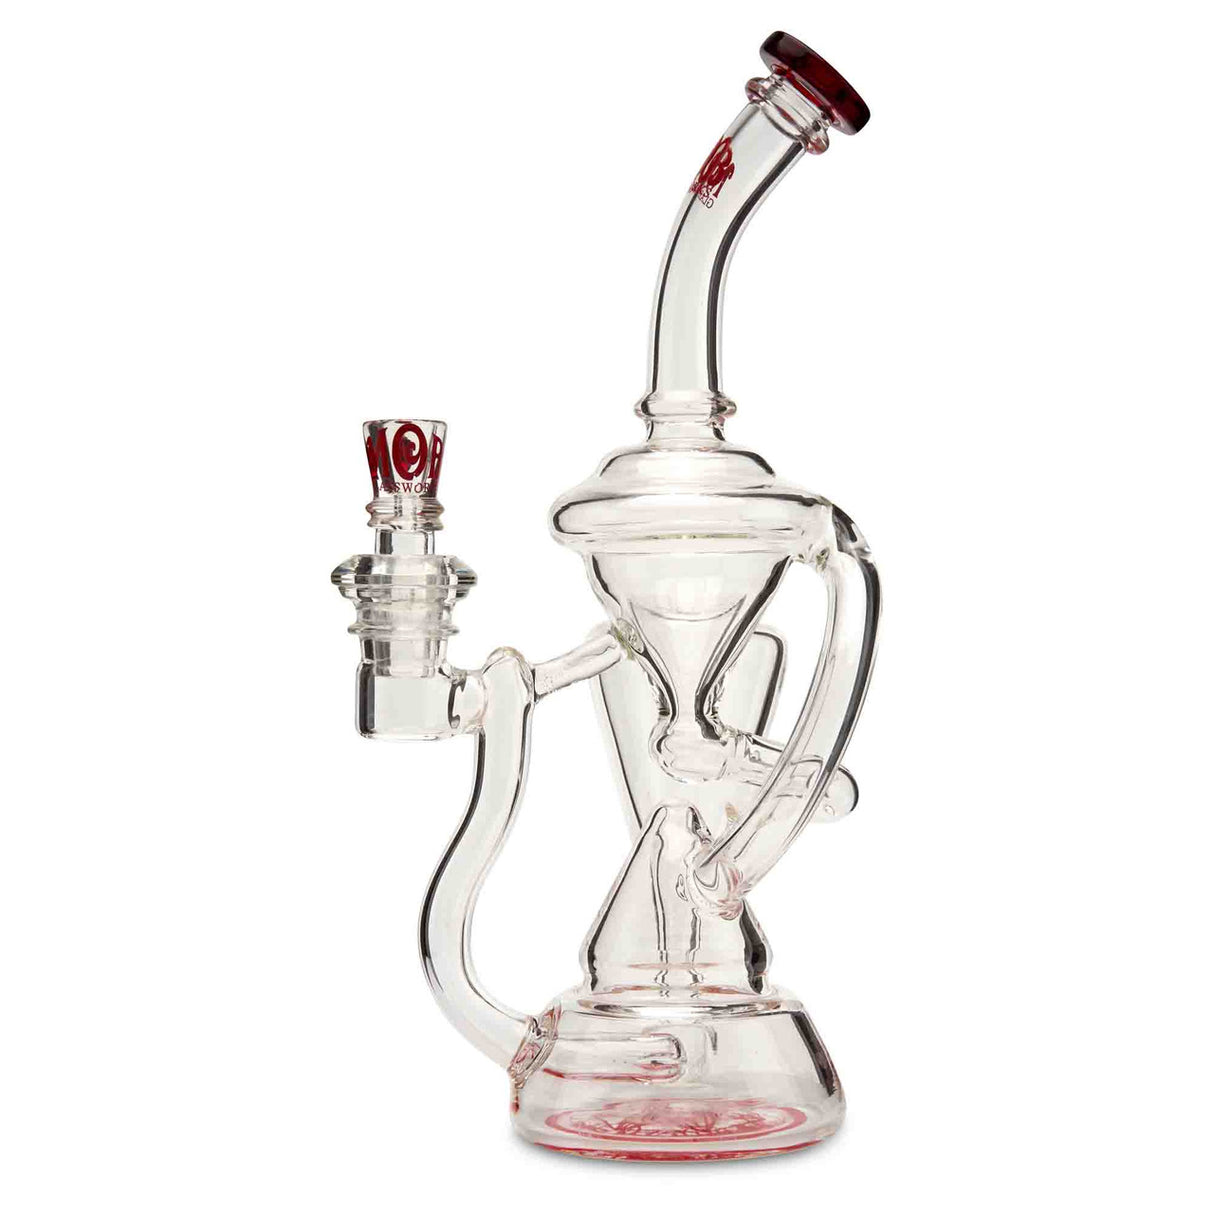 MOB Glass Zenith Recycler red concentrate pipe